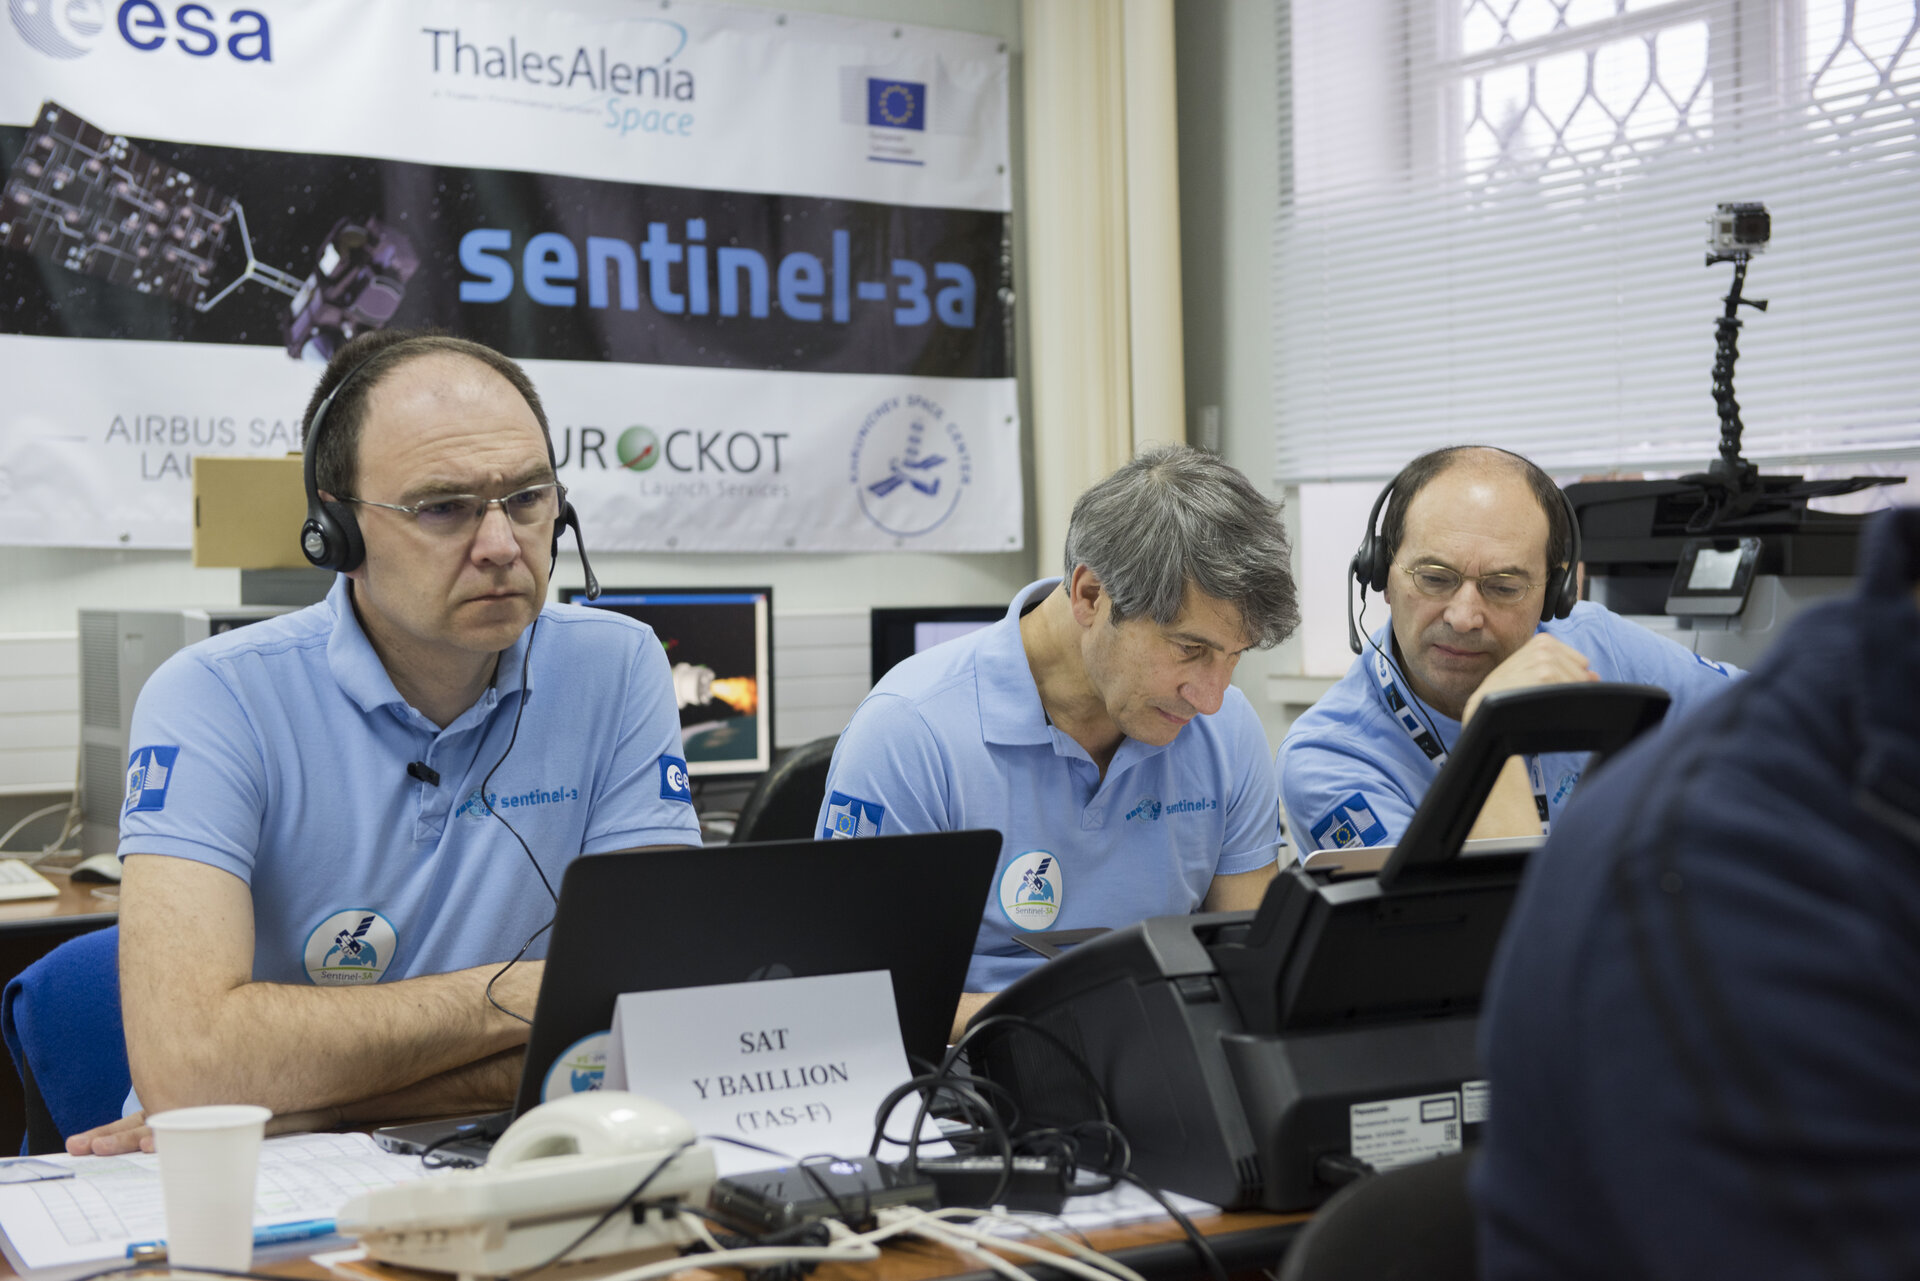 Sentinel-3A full dress rehearsal of the countdown